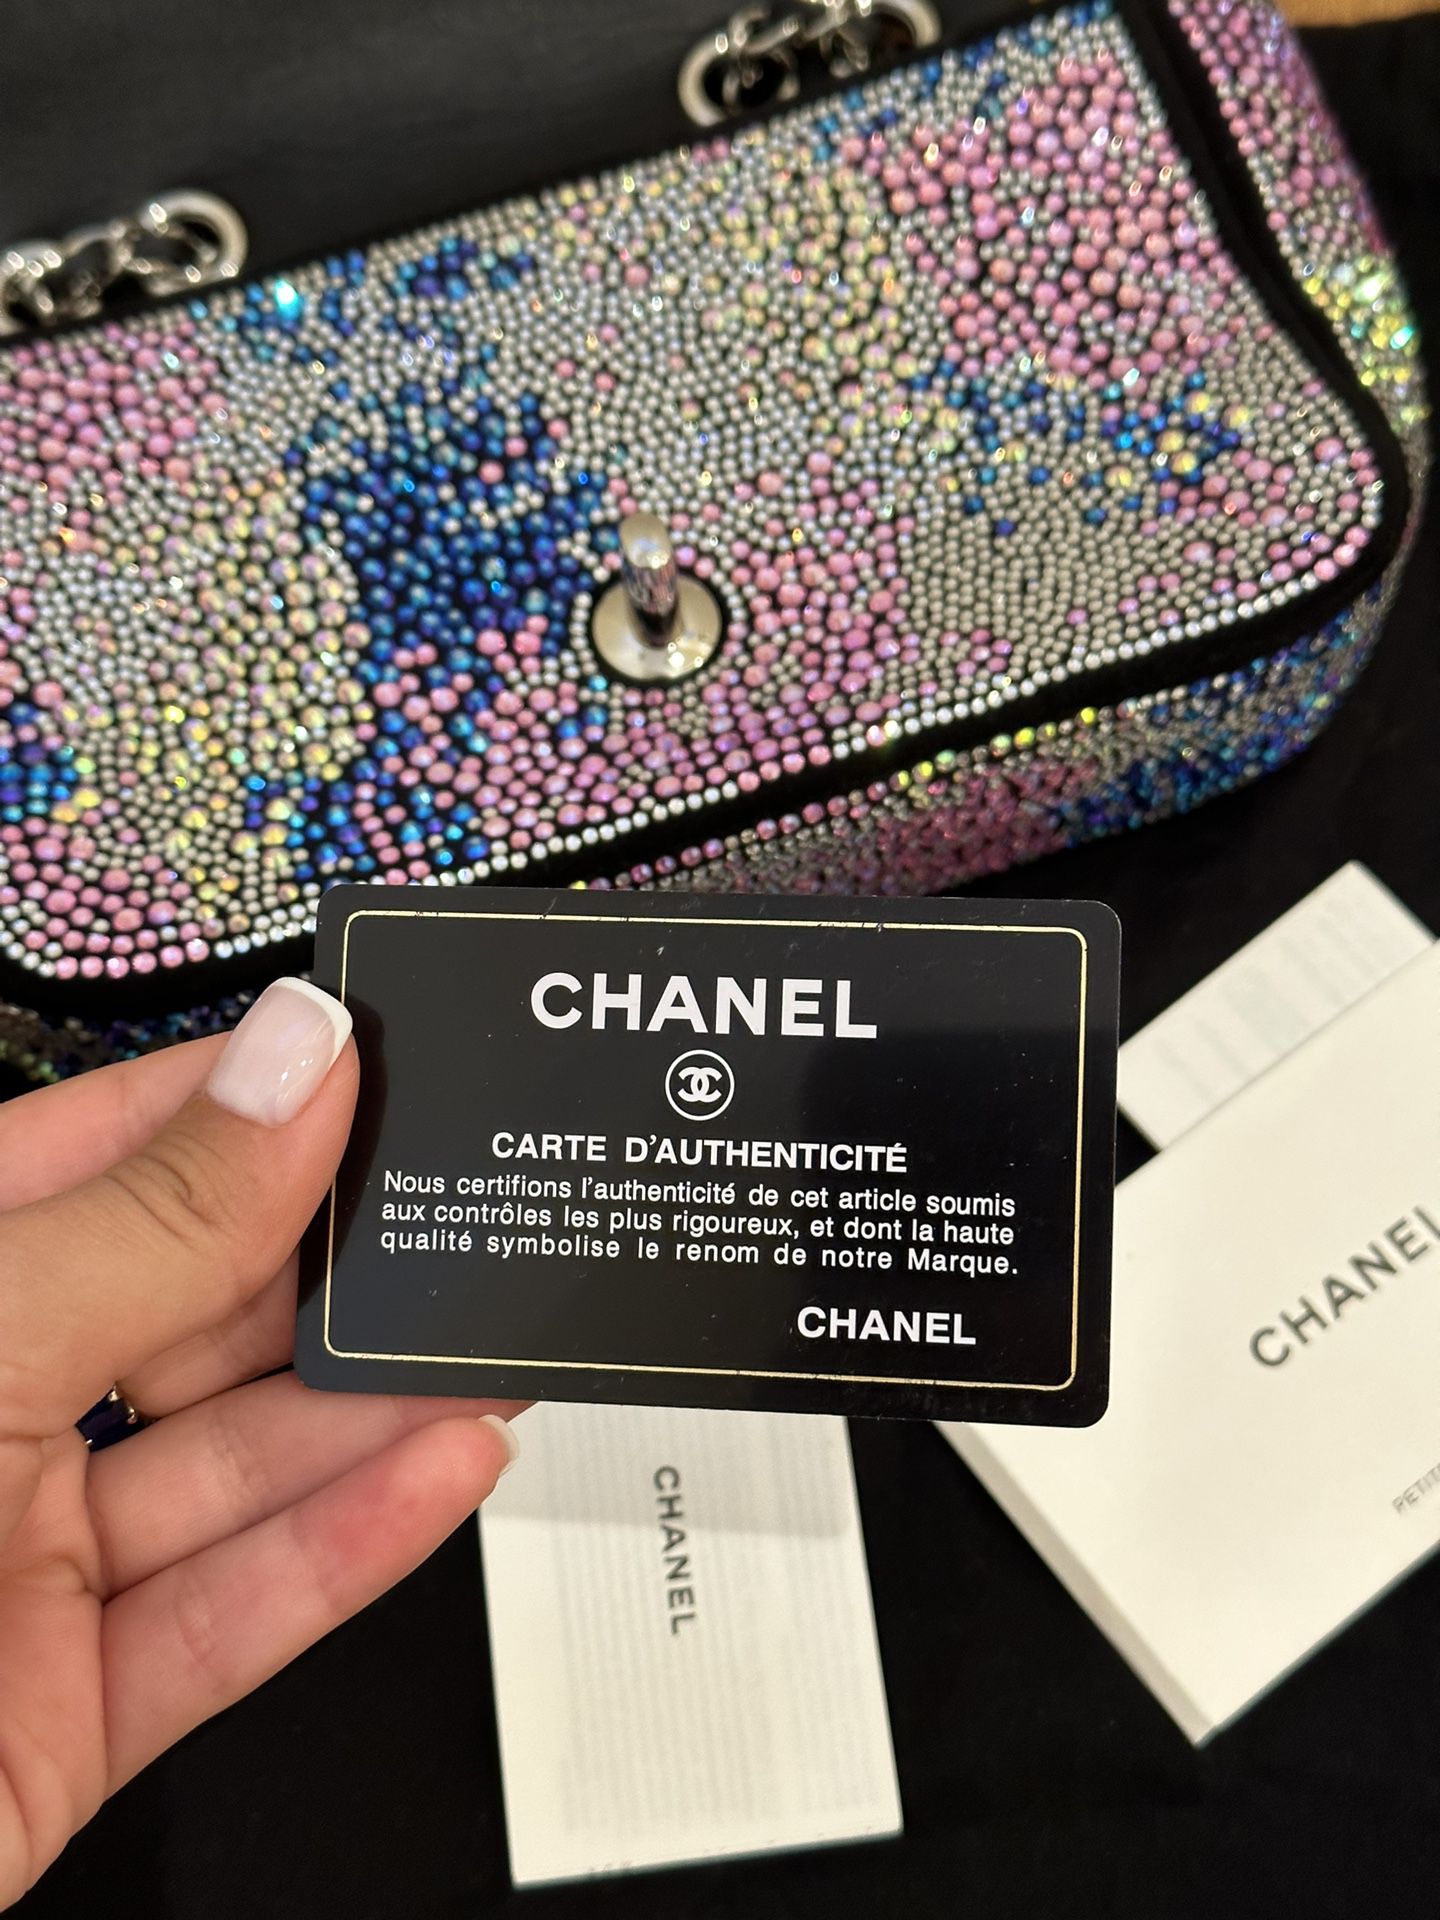 Chanel Crystal Bag Luxe Copy for Sale in Glendale, CA - OfferUp